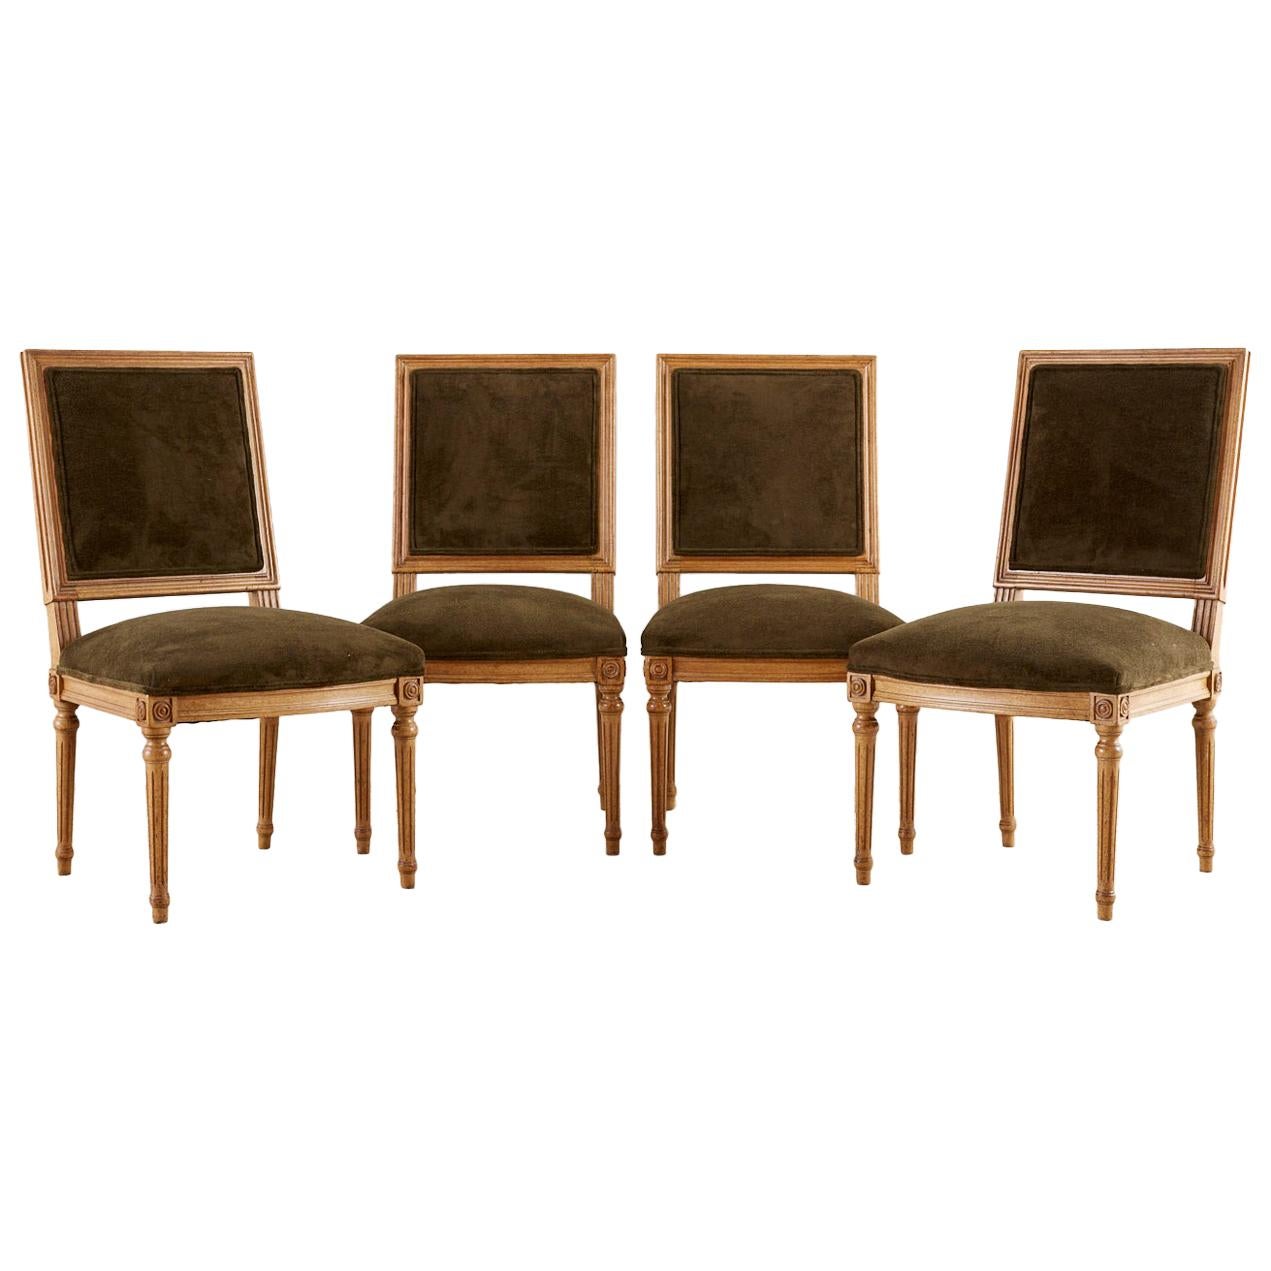 Set of Four Louis XVI Style Green Velvet Dining Chairs